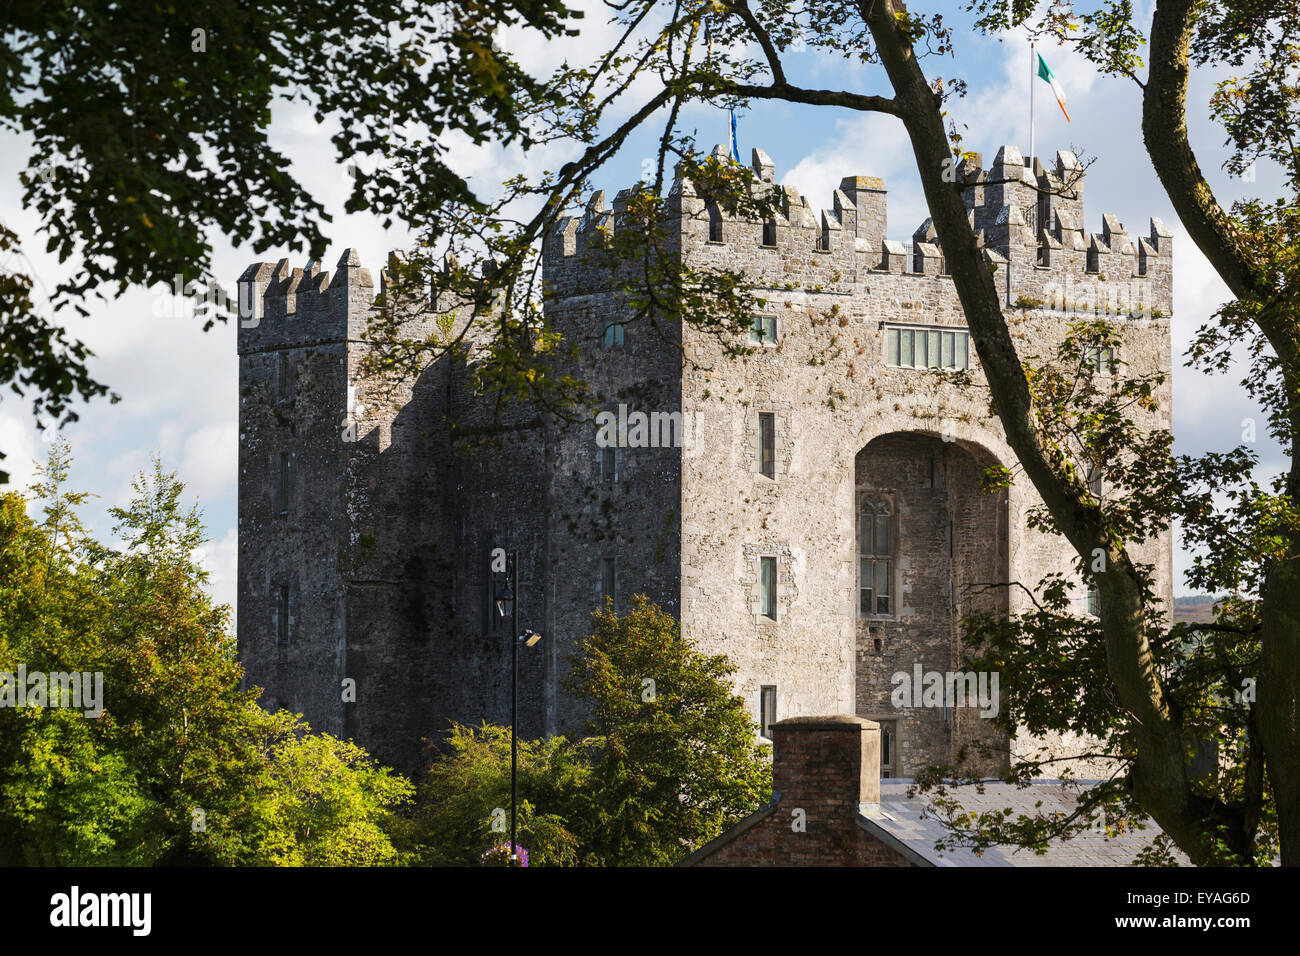 Stone castle framed within trees with clouds and blue sky; Bunratty, County Clare, Ireland Stock Photo